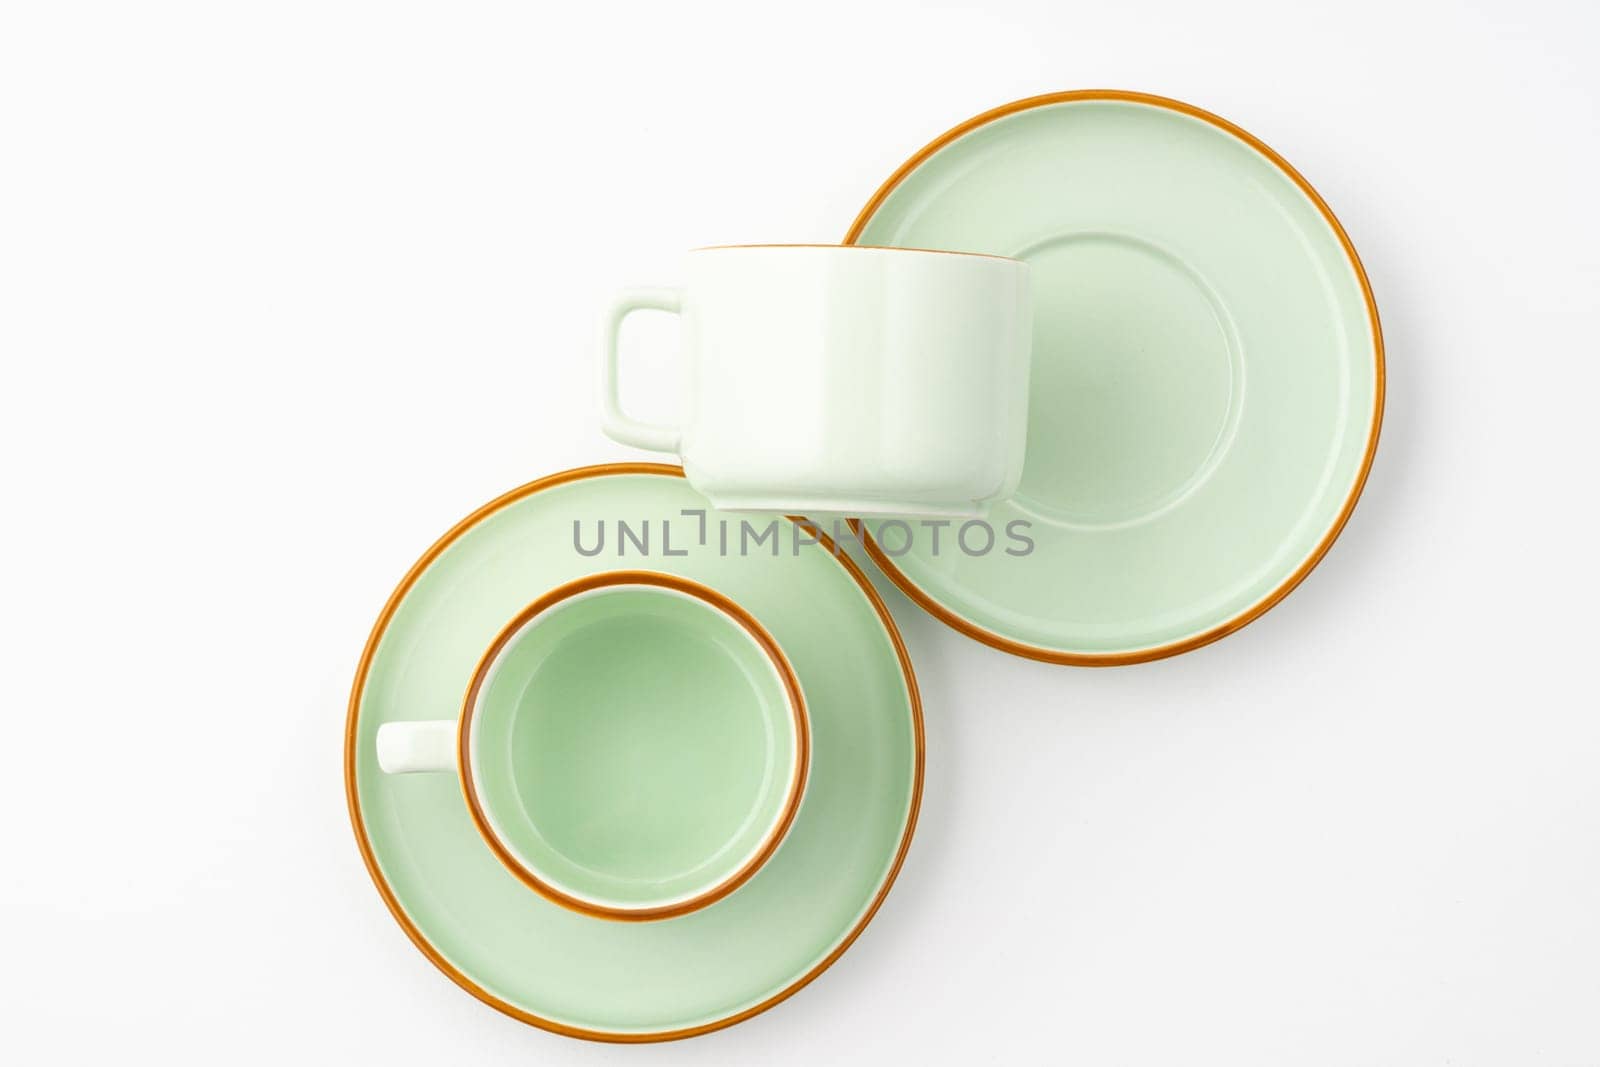 A flat lay of a set of ceramic kitchen utensils such as cups and plates on white background by A_Karim